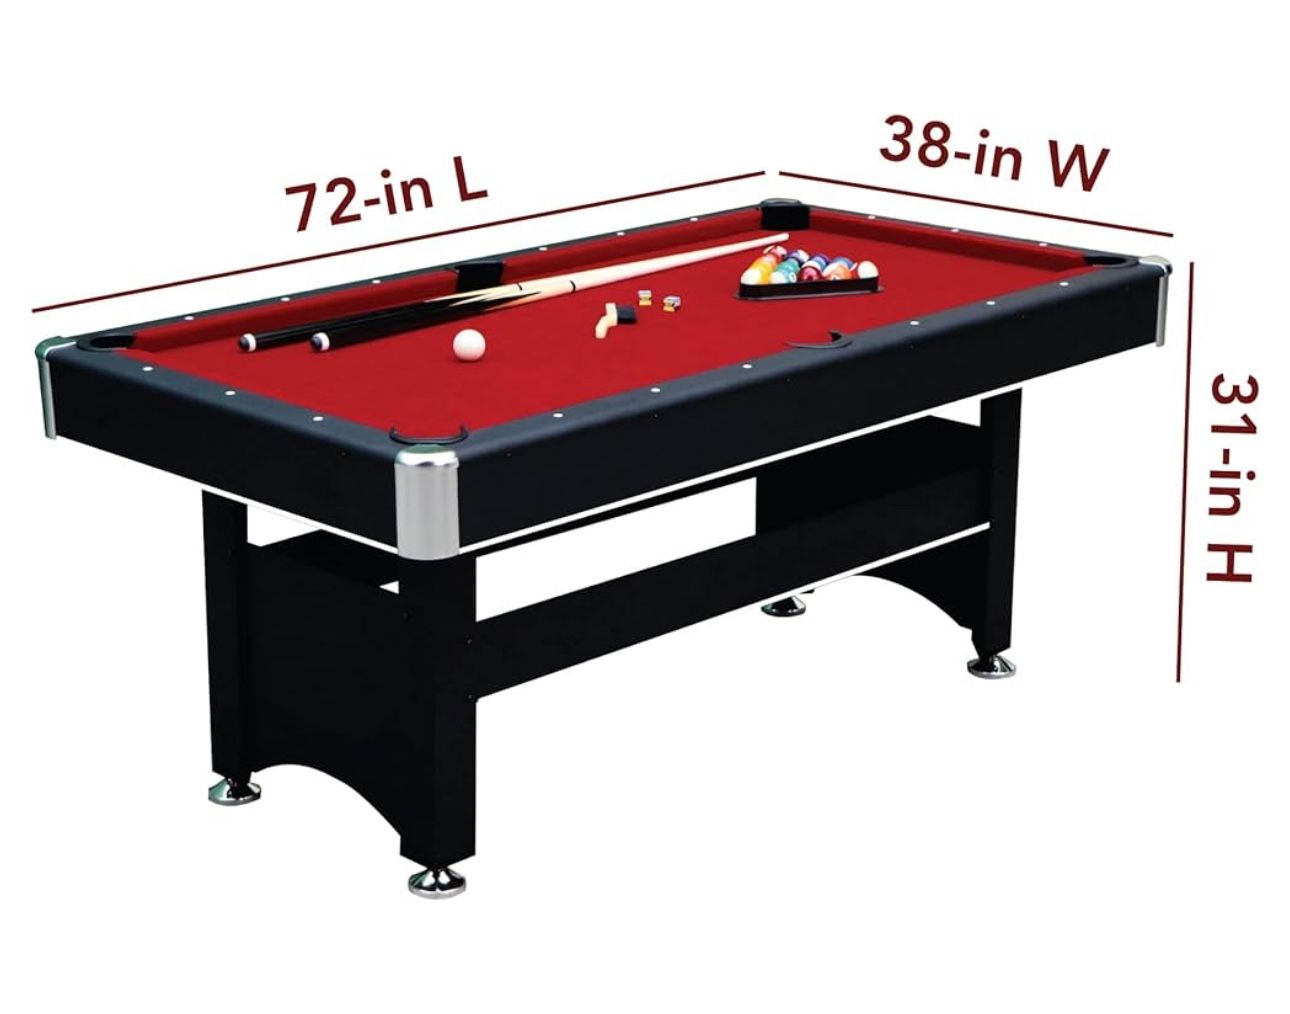 Hathaway Spartan 6-ft Pool Table